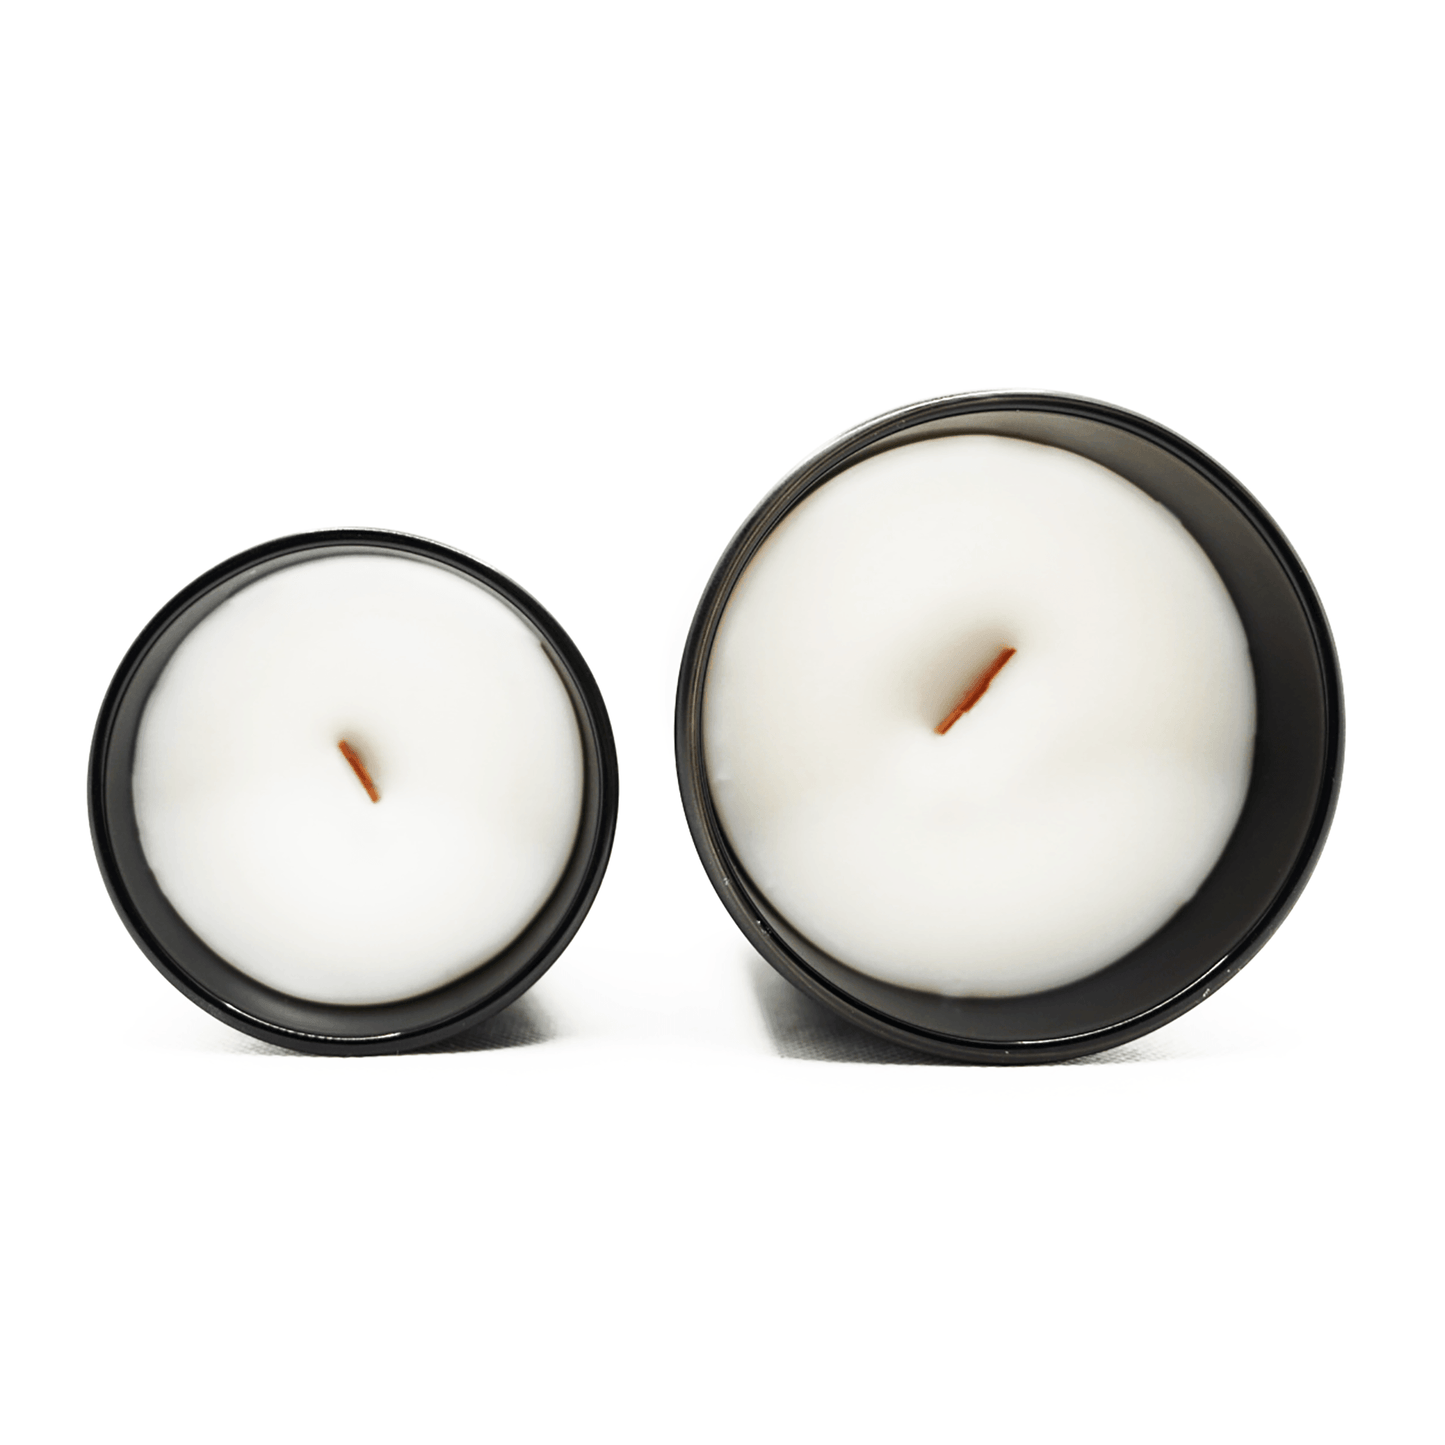 Old Lives Matter - Woodwick Candle - BADWAX